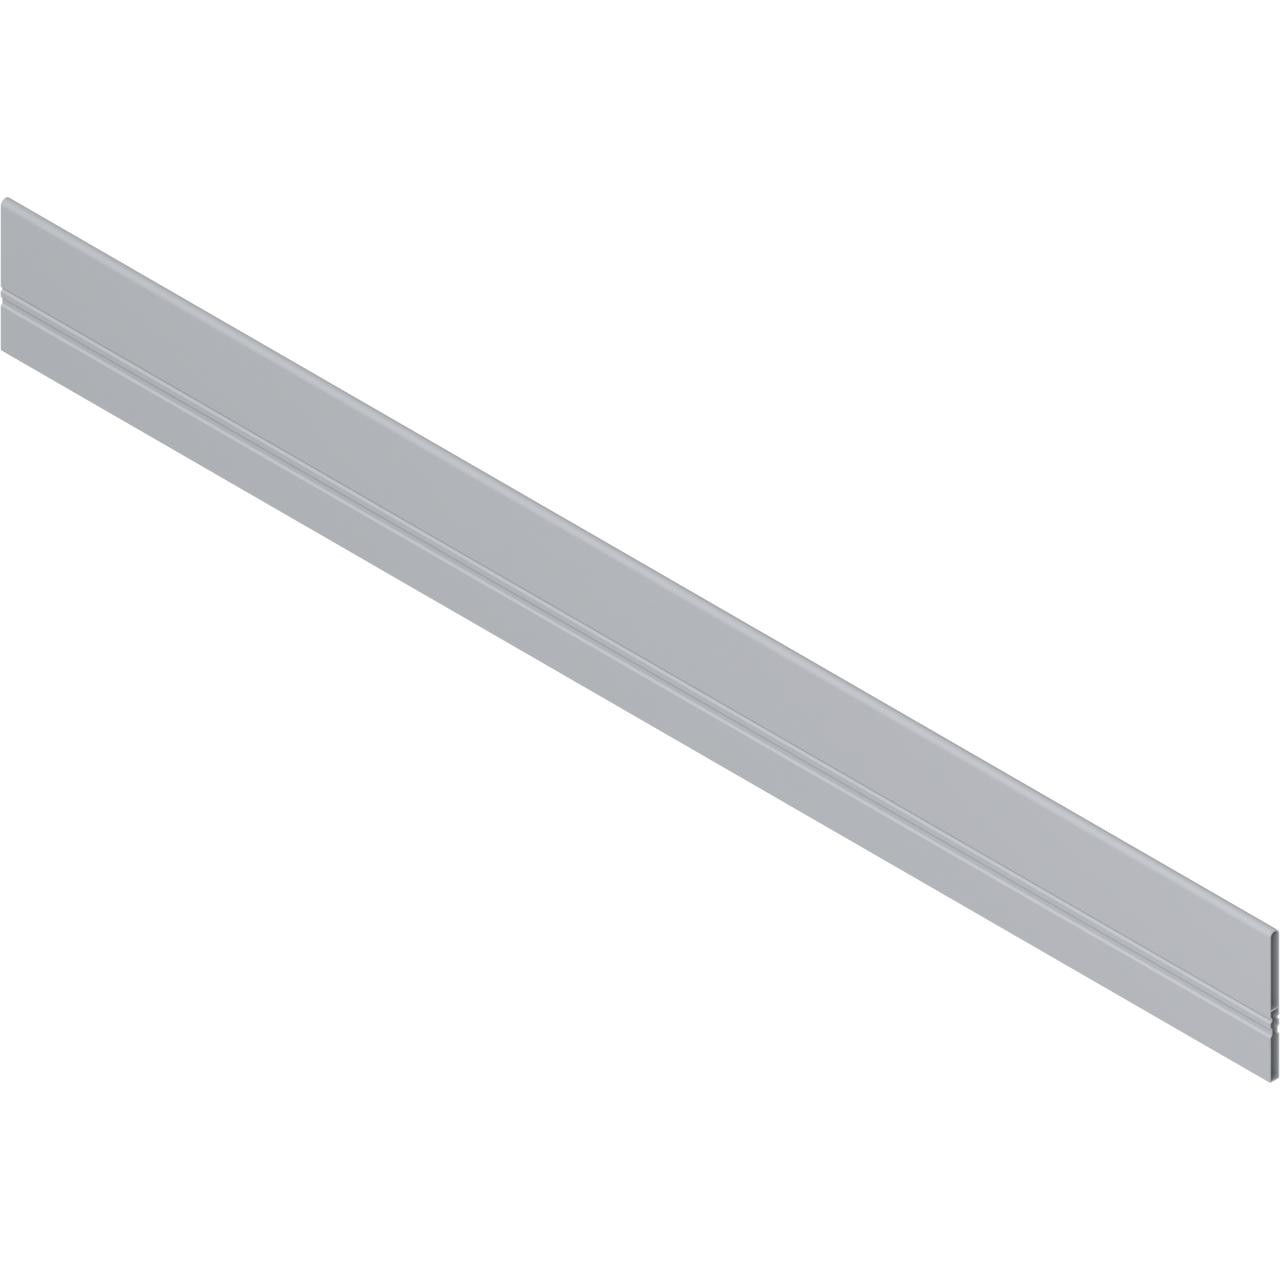  Blum Z40H1077A ORGA-LINE cross divider profile, for TANDEM AND TANDEMBOX plus deep drawer, aluminum 